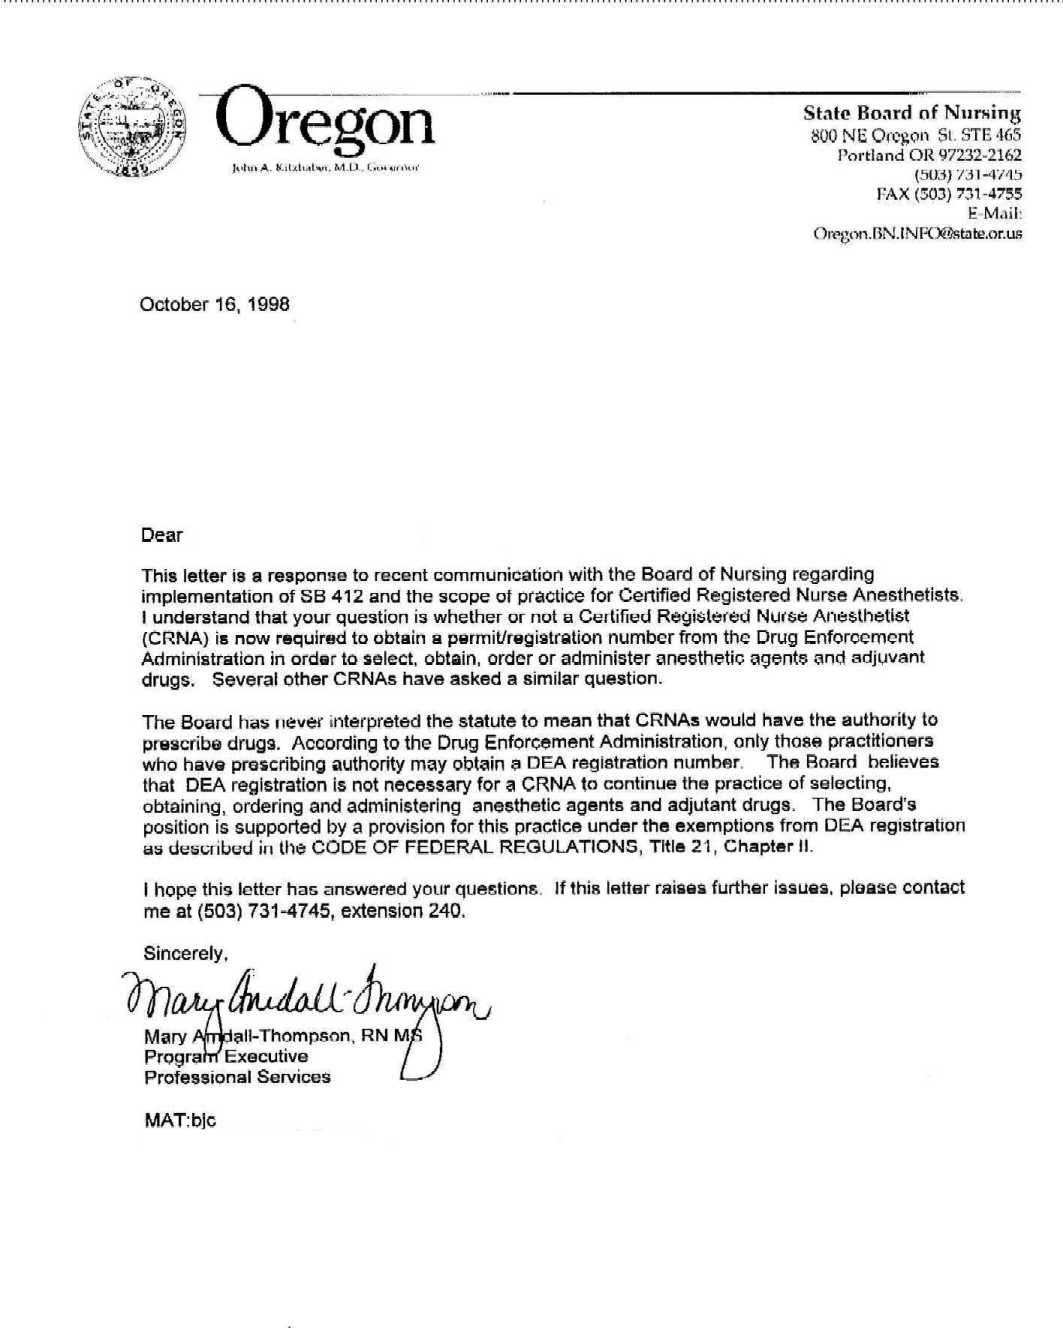 Crna Recommendation Letter Akali within measurements 1063 X 1328